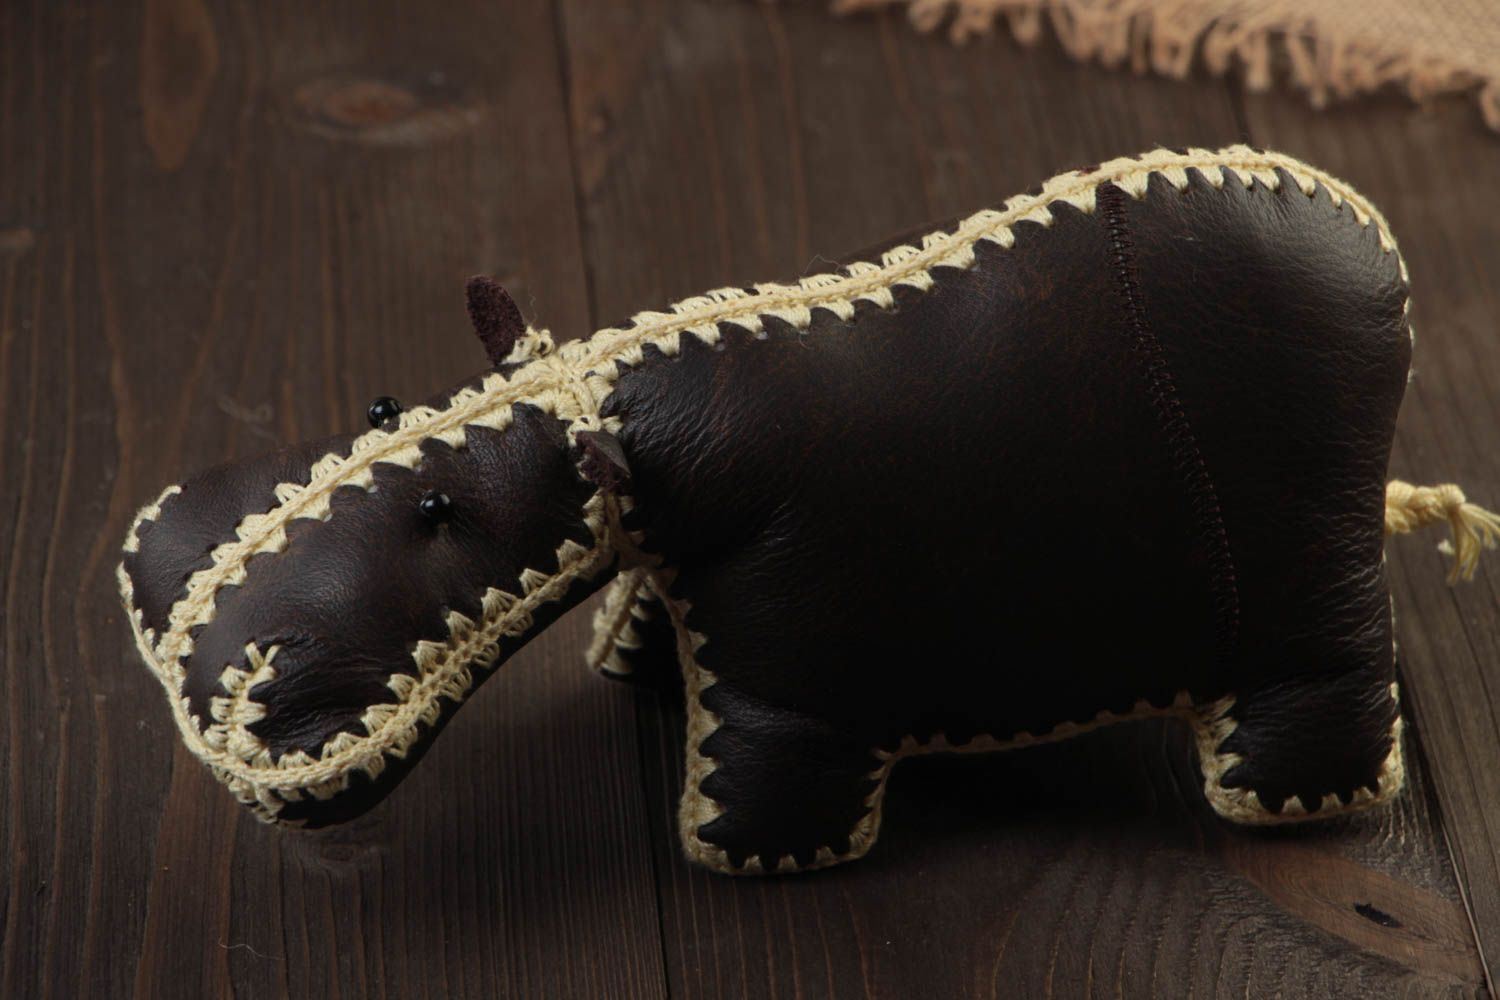 Handmade large designer soft toy sewn of dark leather with light threads Hippo photo 1